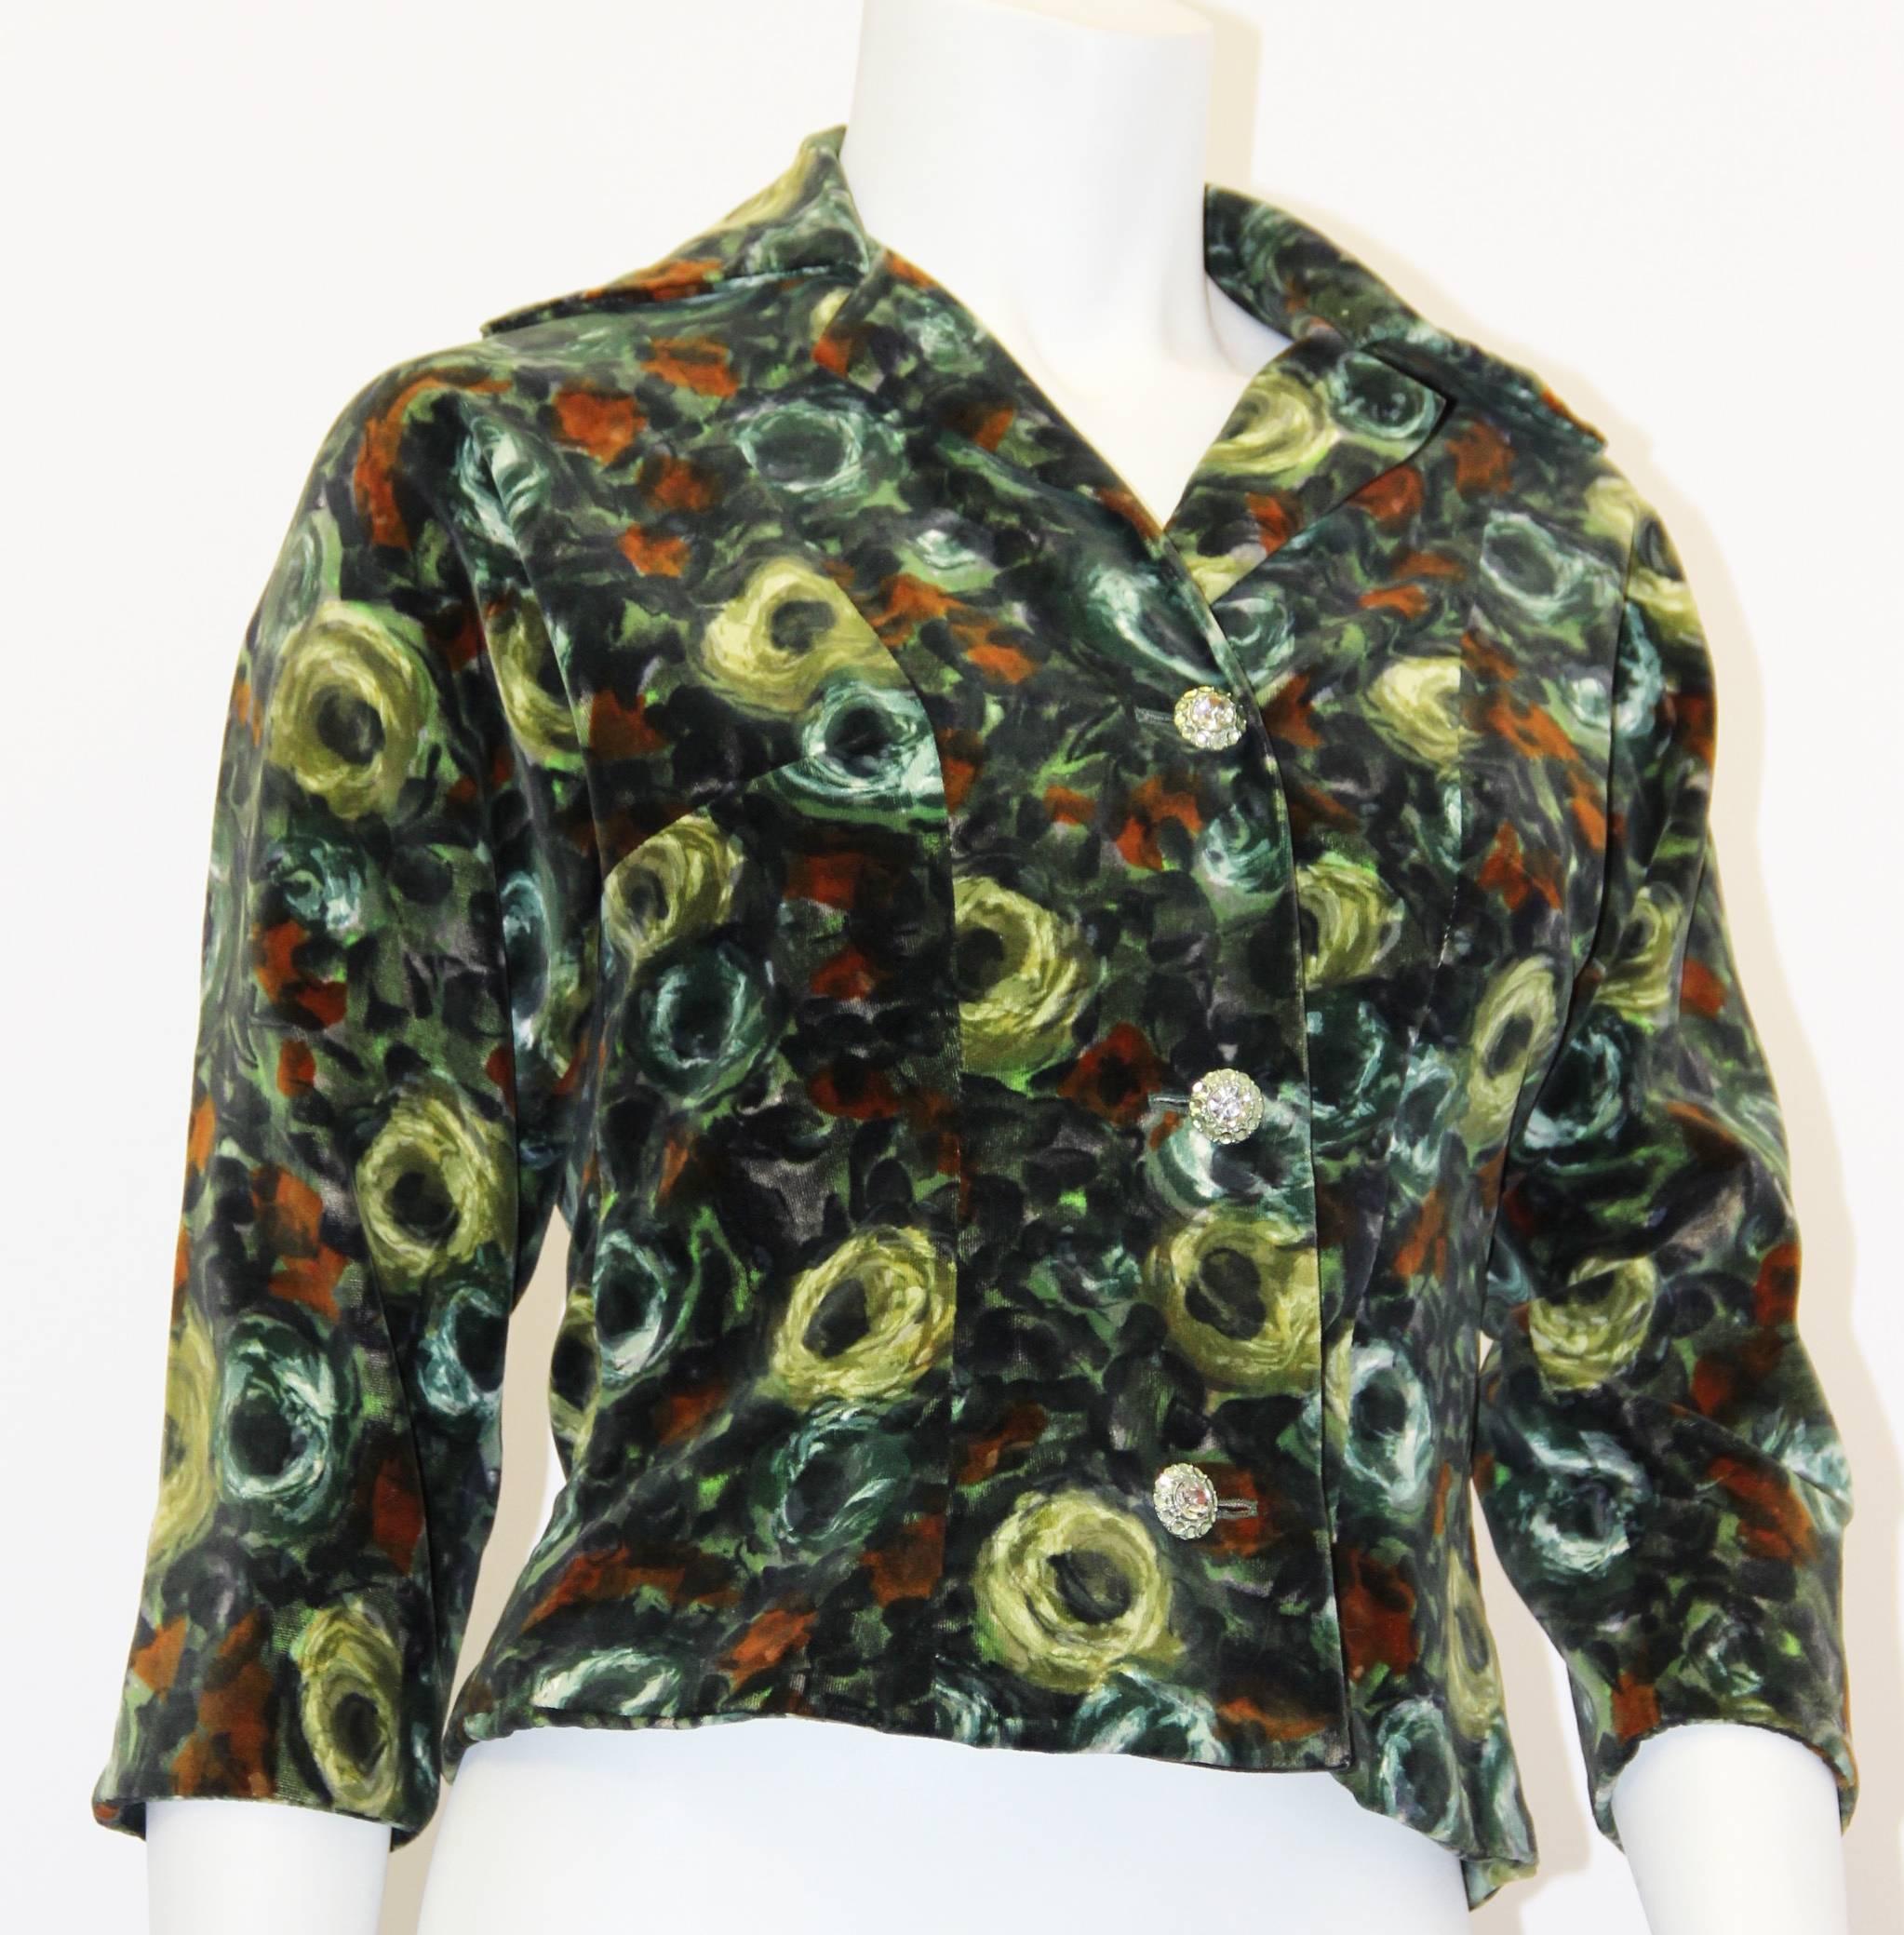 50s painterly velvet top. Rhinestone buttons up front. Made in Italy 